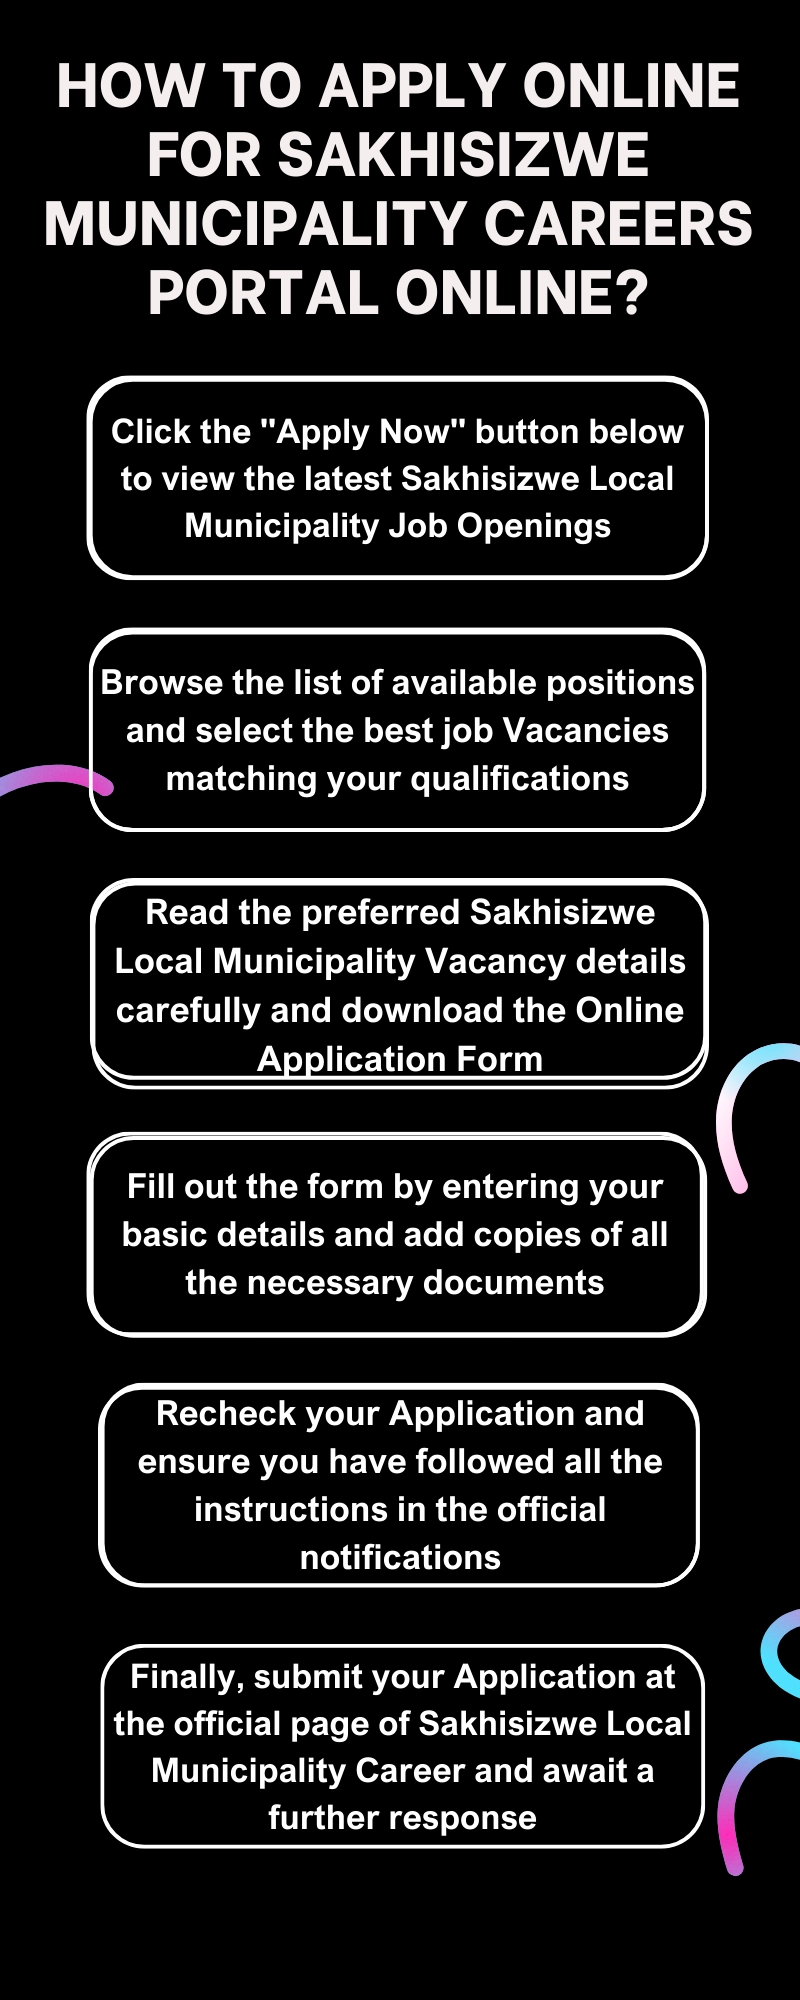 How to Apply online for Sakhisizwe Municipality Careers Portal Online?